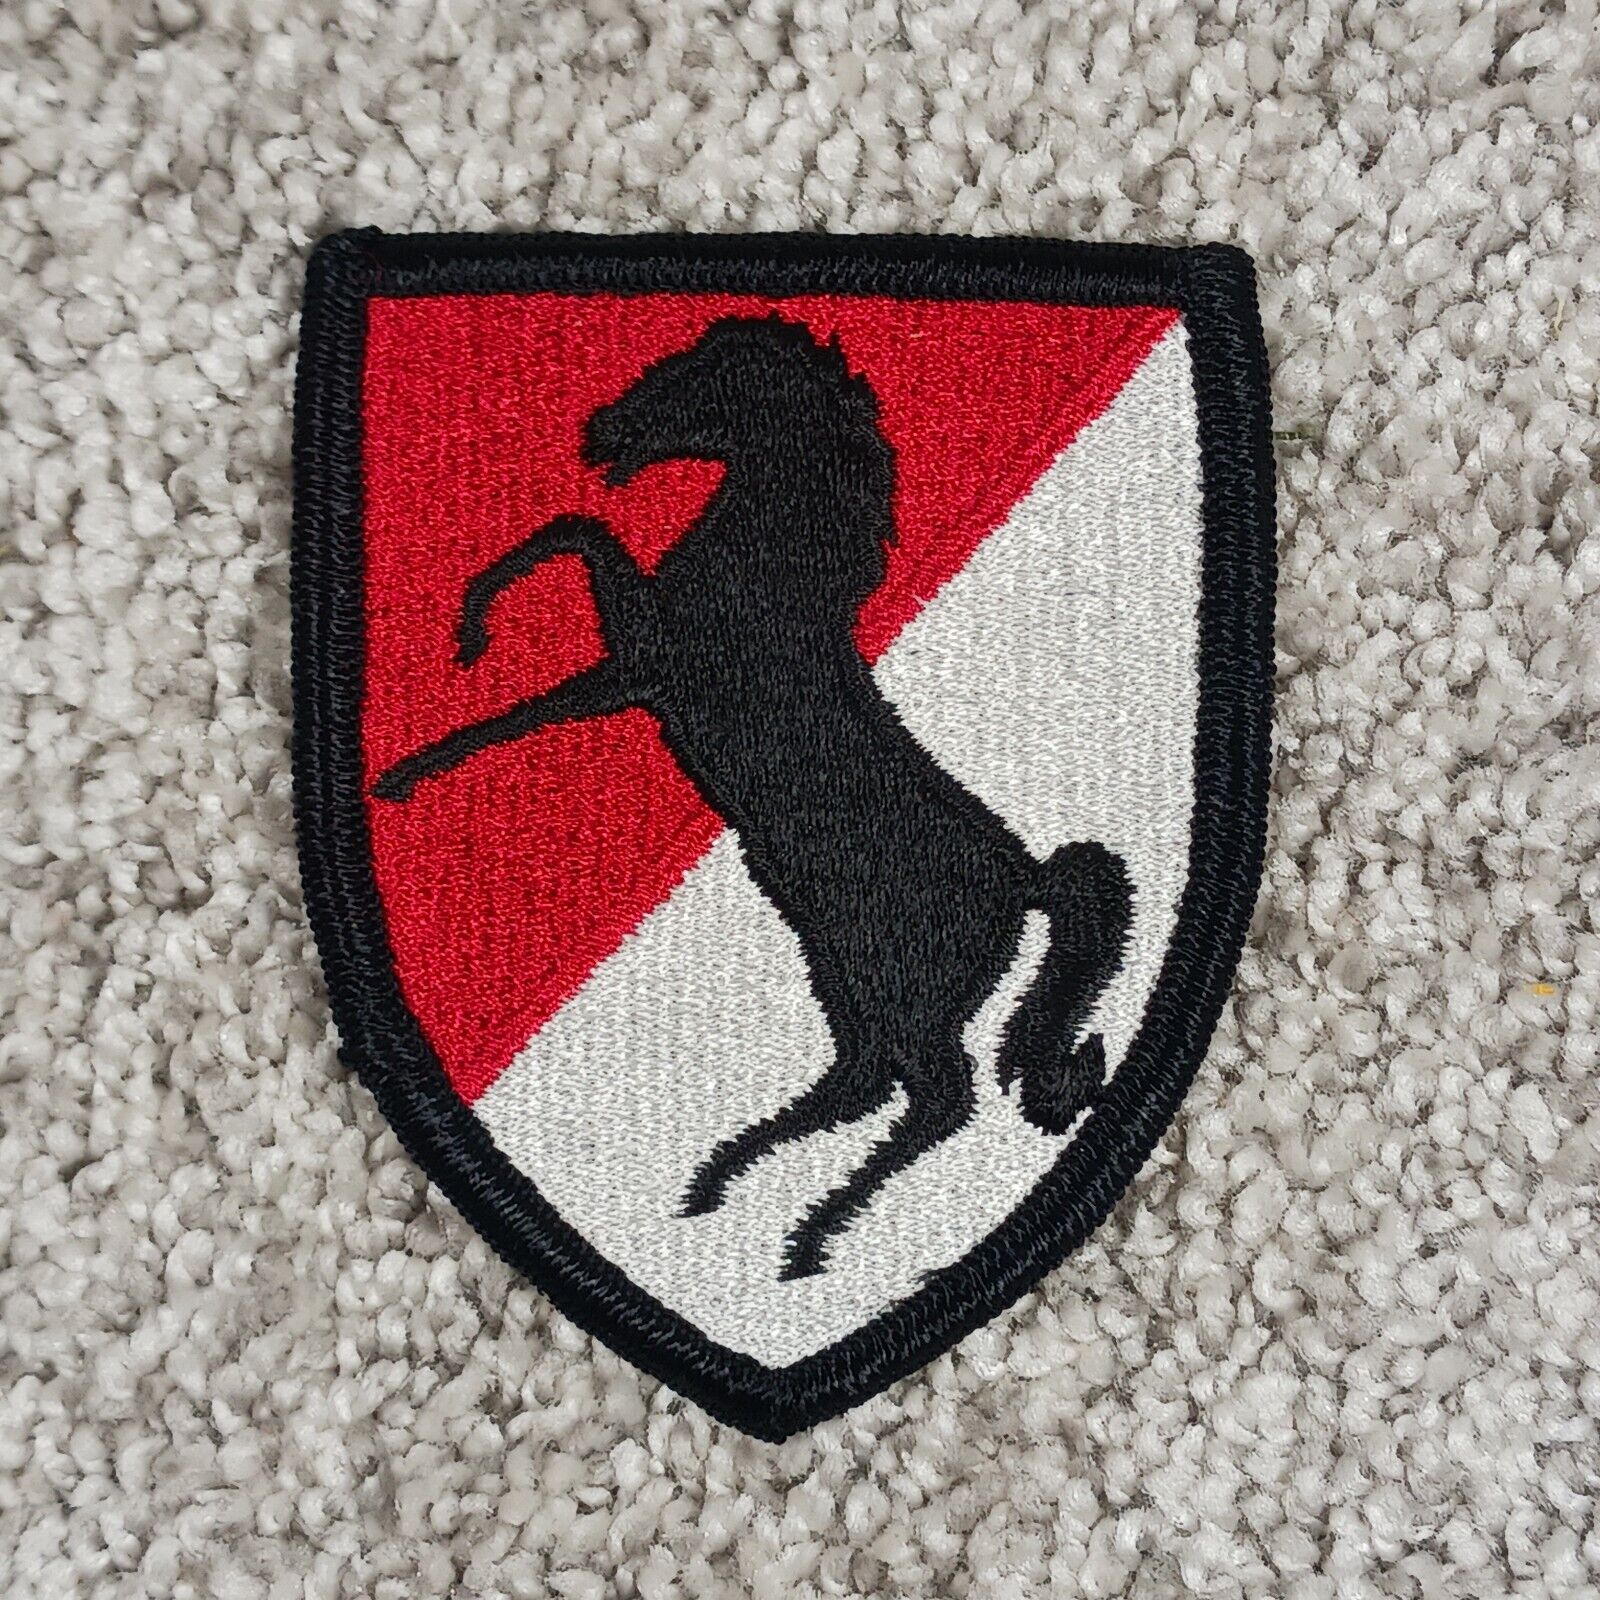 Vintage 11th Armored Calvory Regiment Patch US Army Black Horse WWII Original 